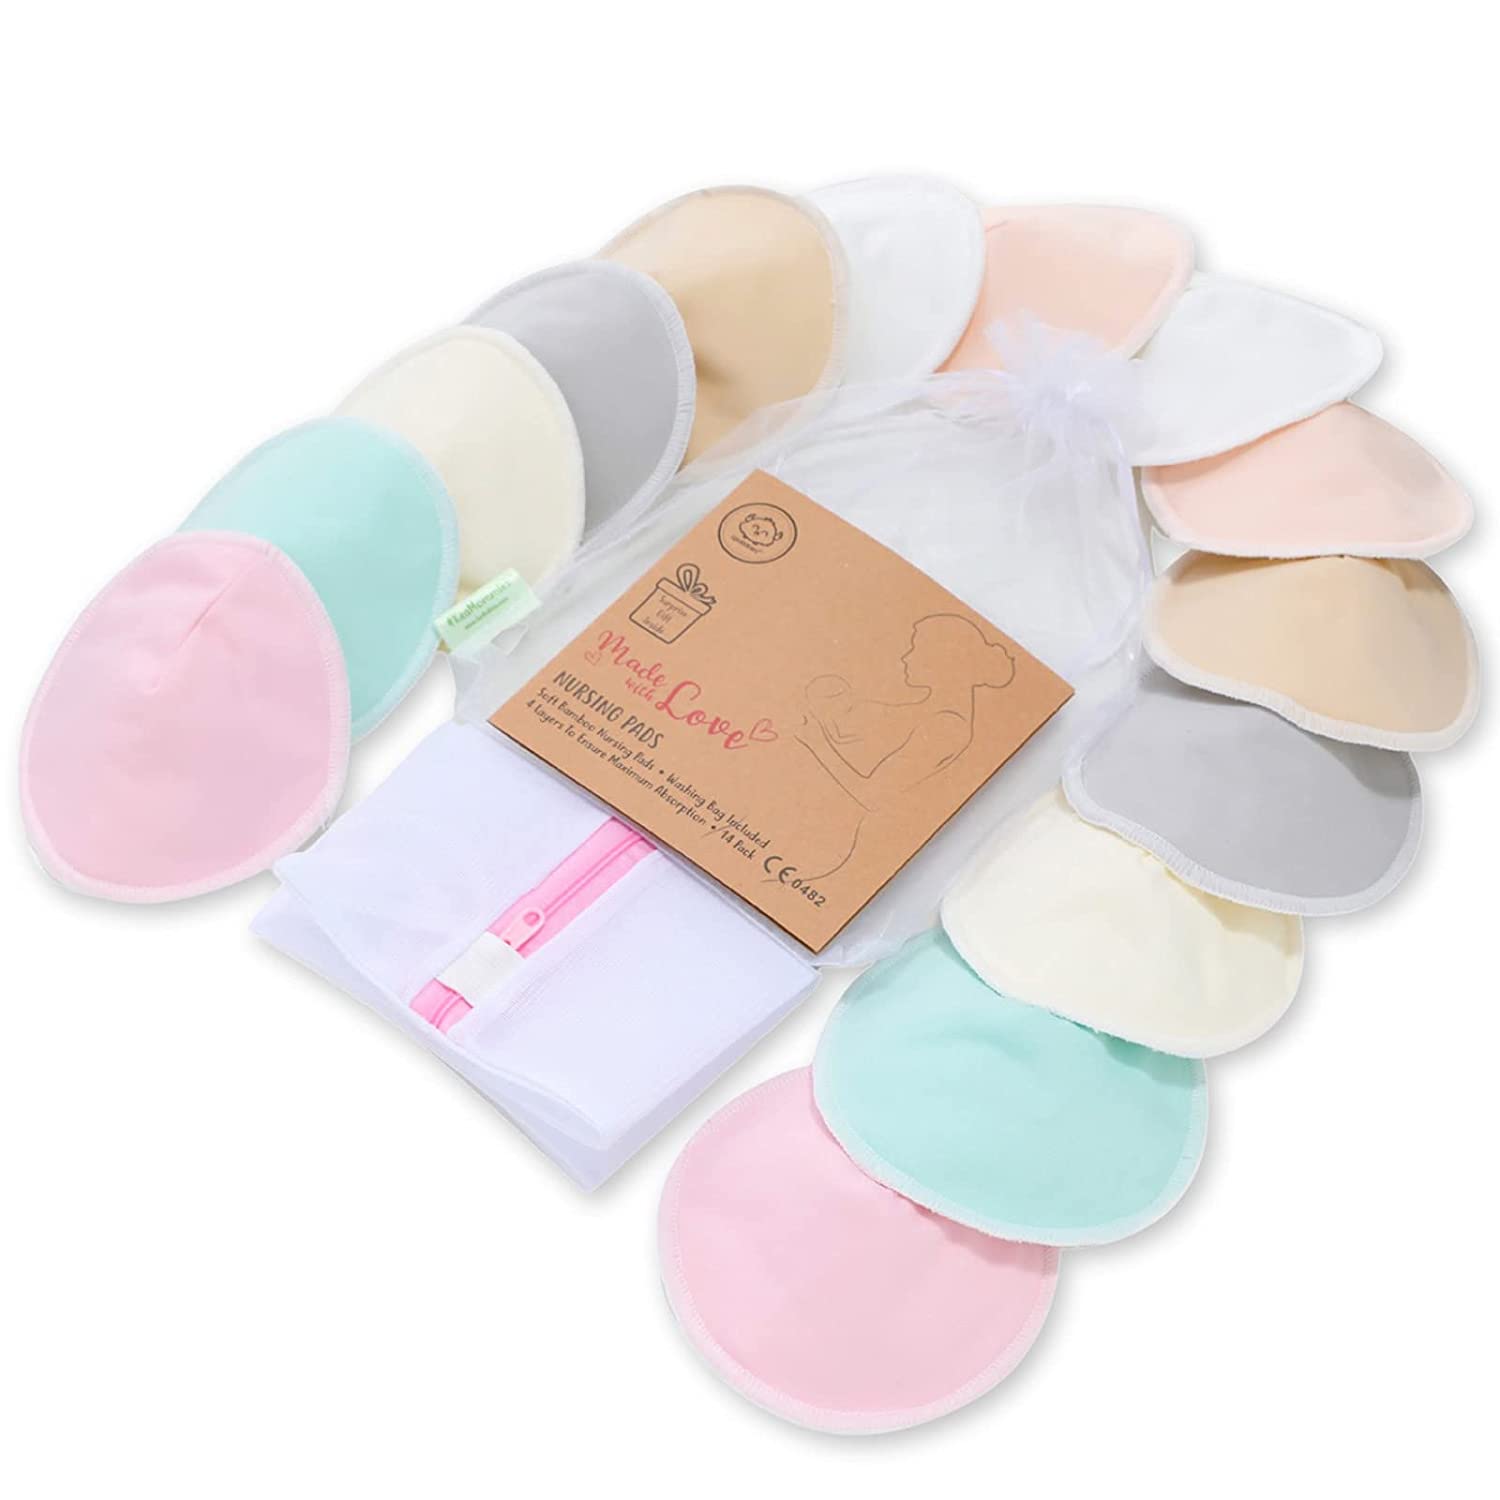 Casewin 14 Pcs Nursing Pads Set, Nursing Breast Pads Organic Bamboo Cotton Washable  Reusable Bamboo Breast Pads Soft Absorbent Nursing Pads for Breastfeeding(with2  Laundry Bags) 